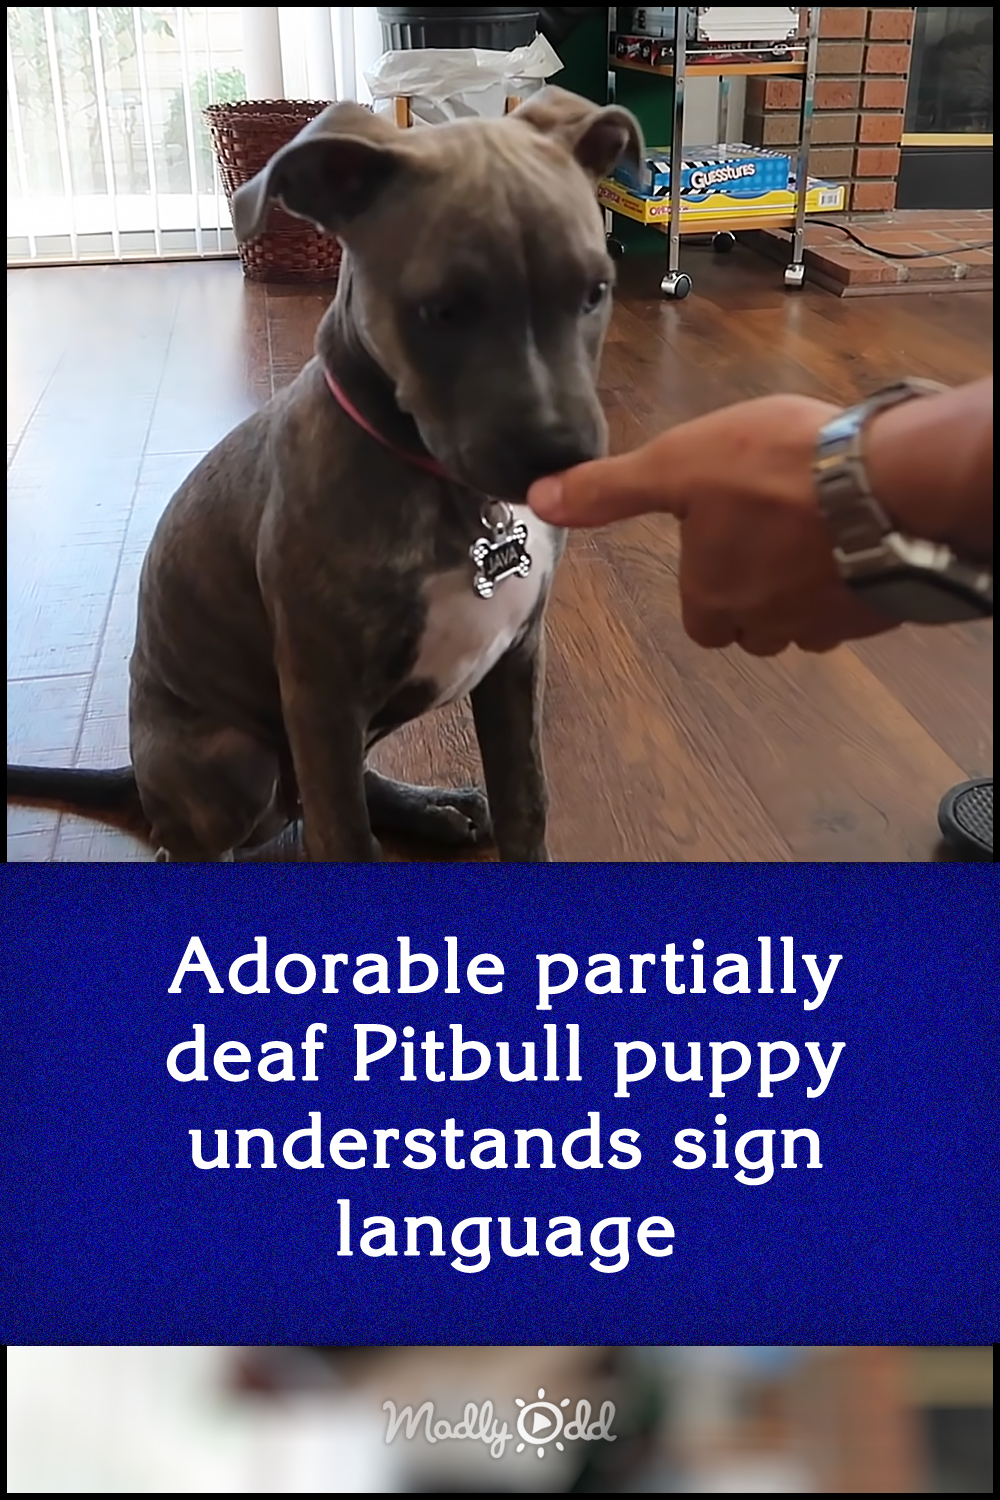 Adorable partially deaf Pitbull puppy understands sign language